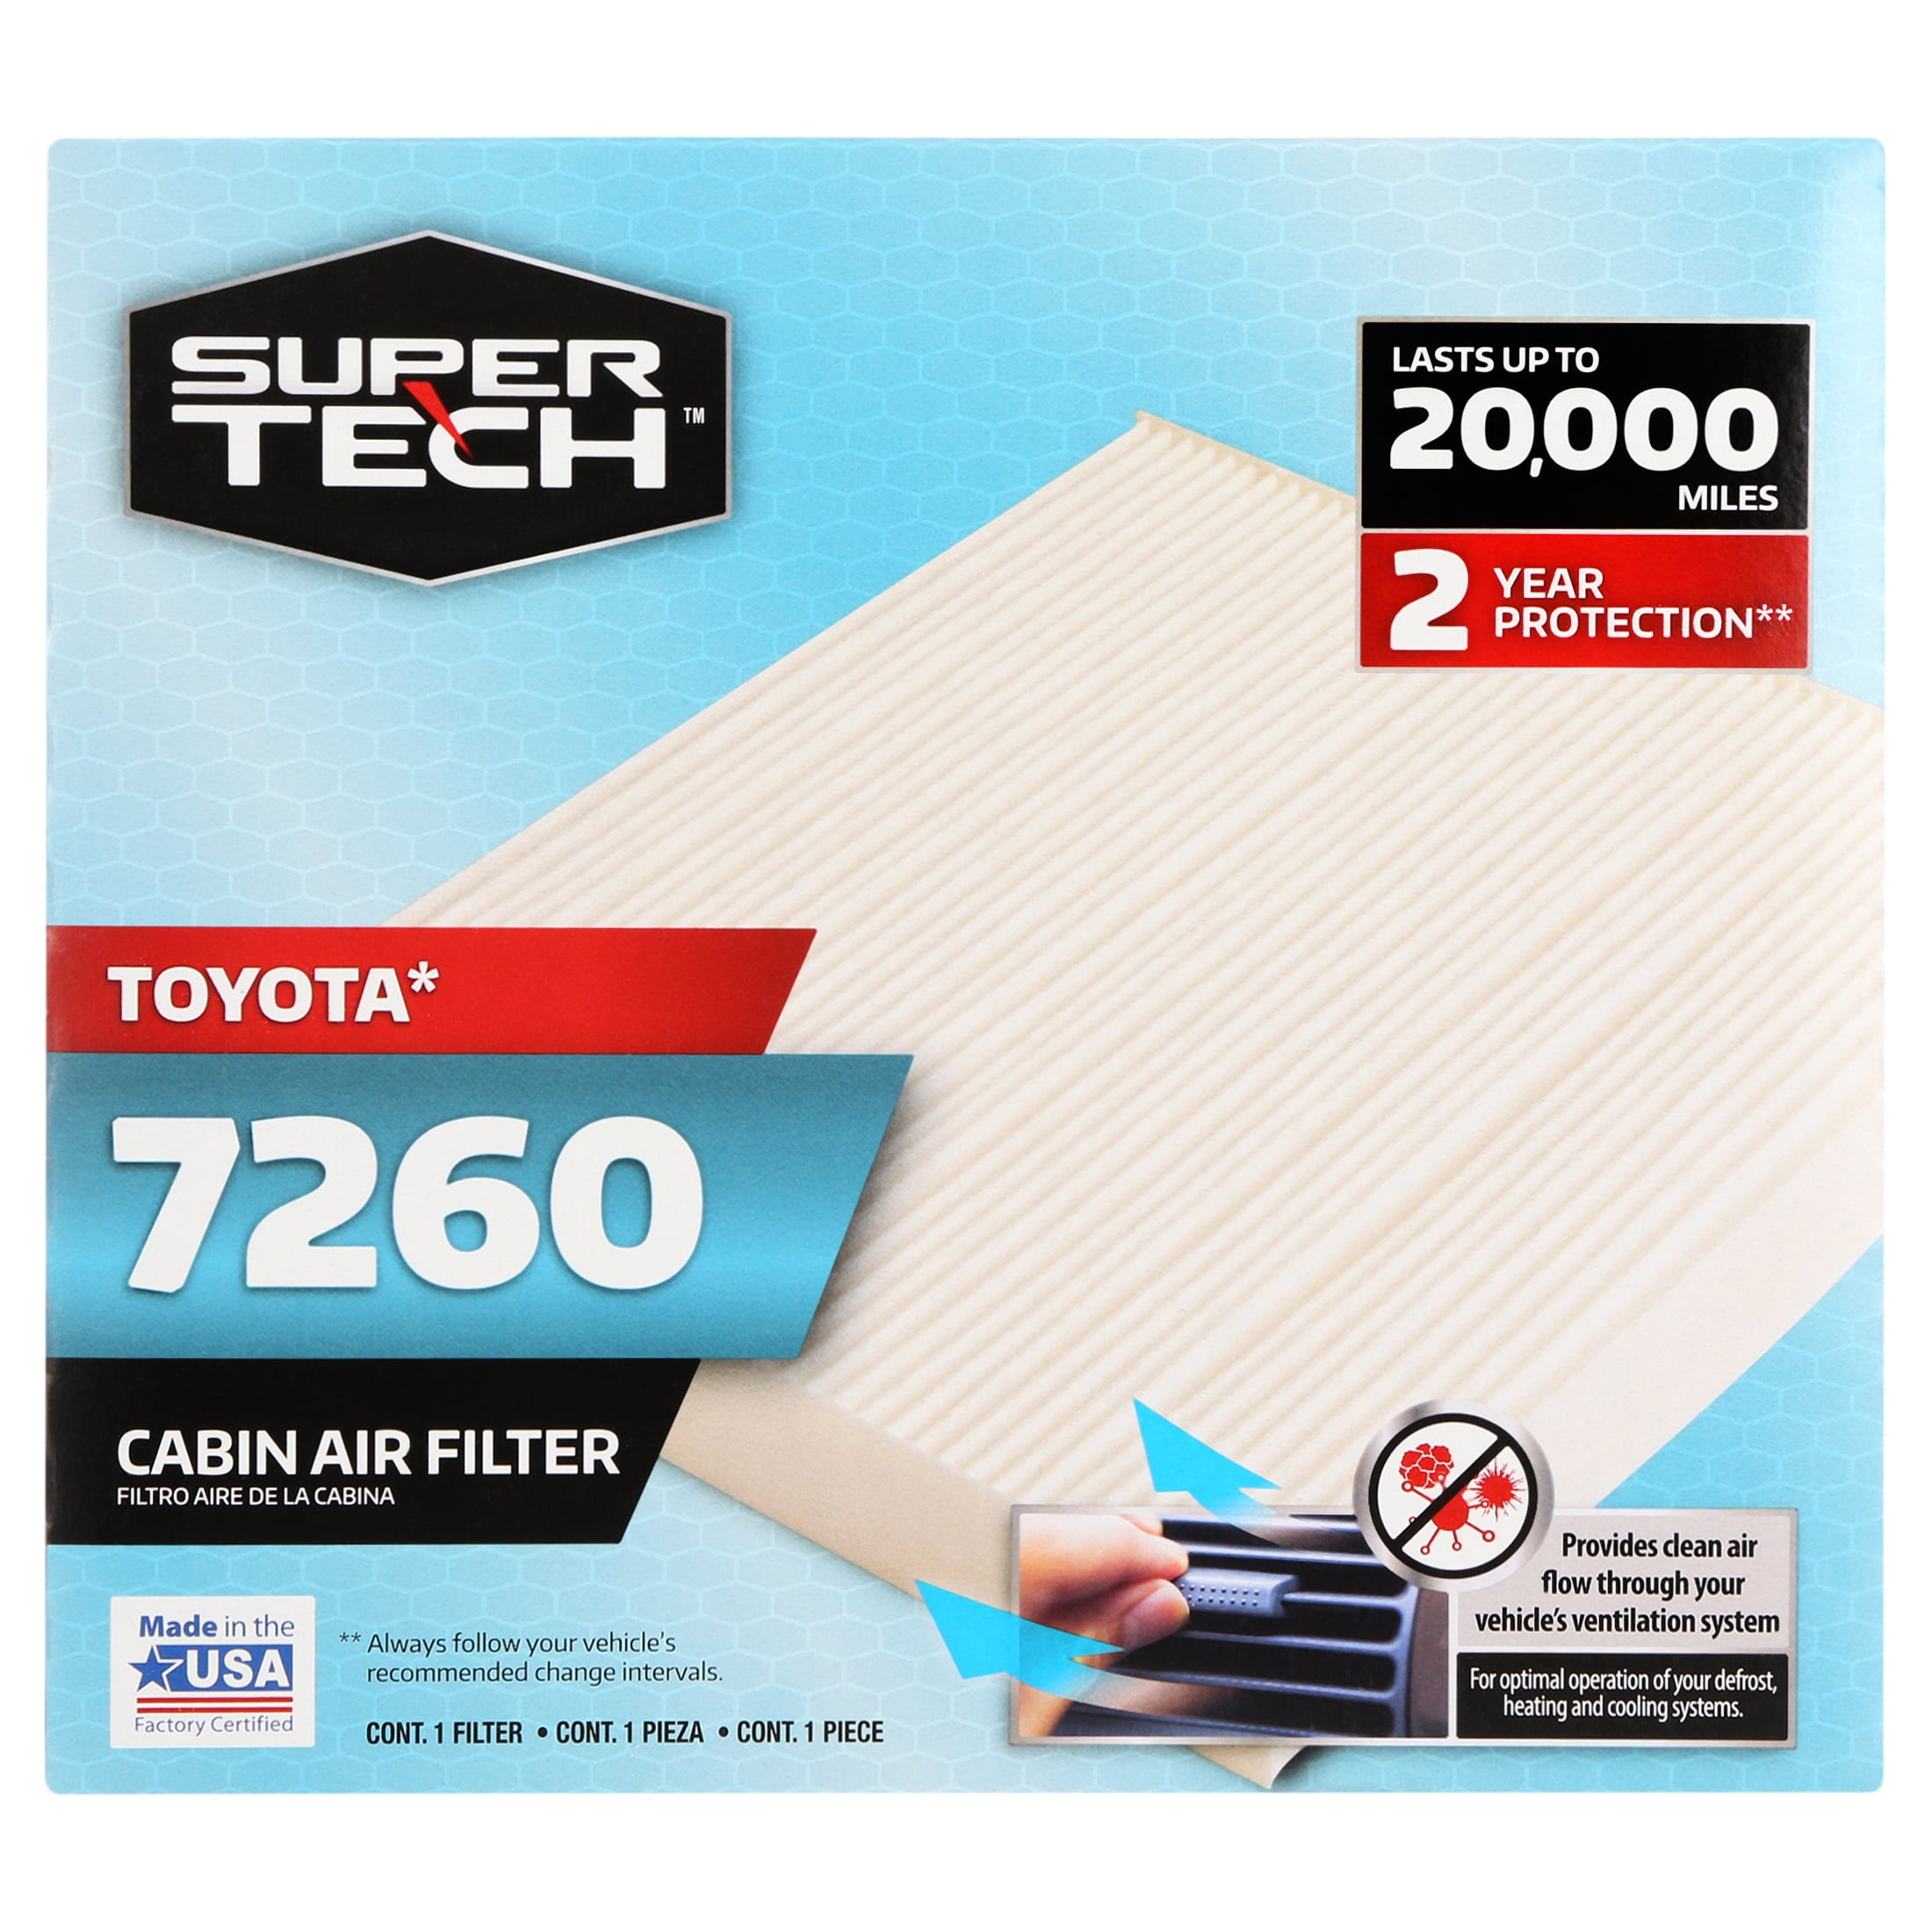 SuperTech Cabin Air Filter, 7260, Replacement Cabin Filter for Toyota